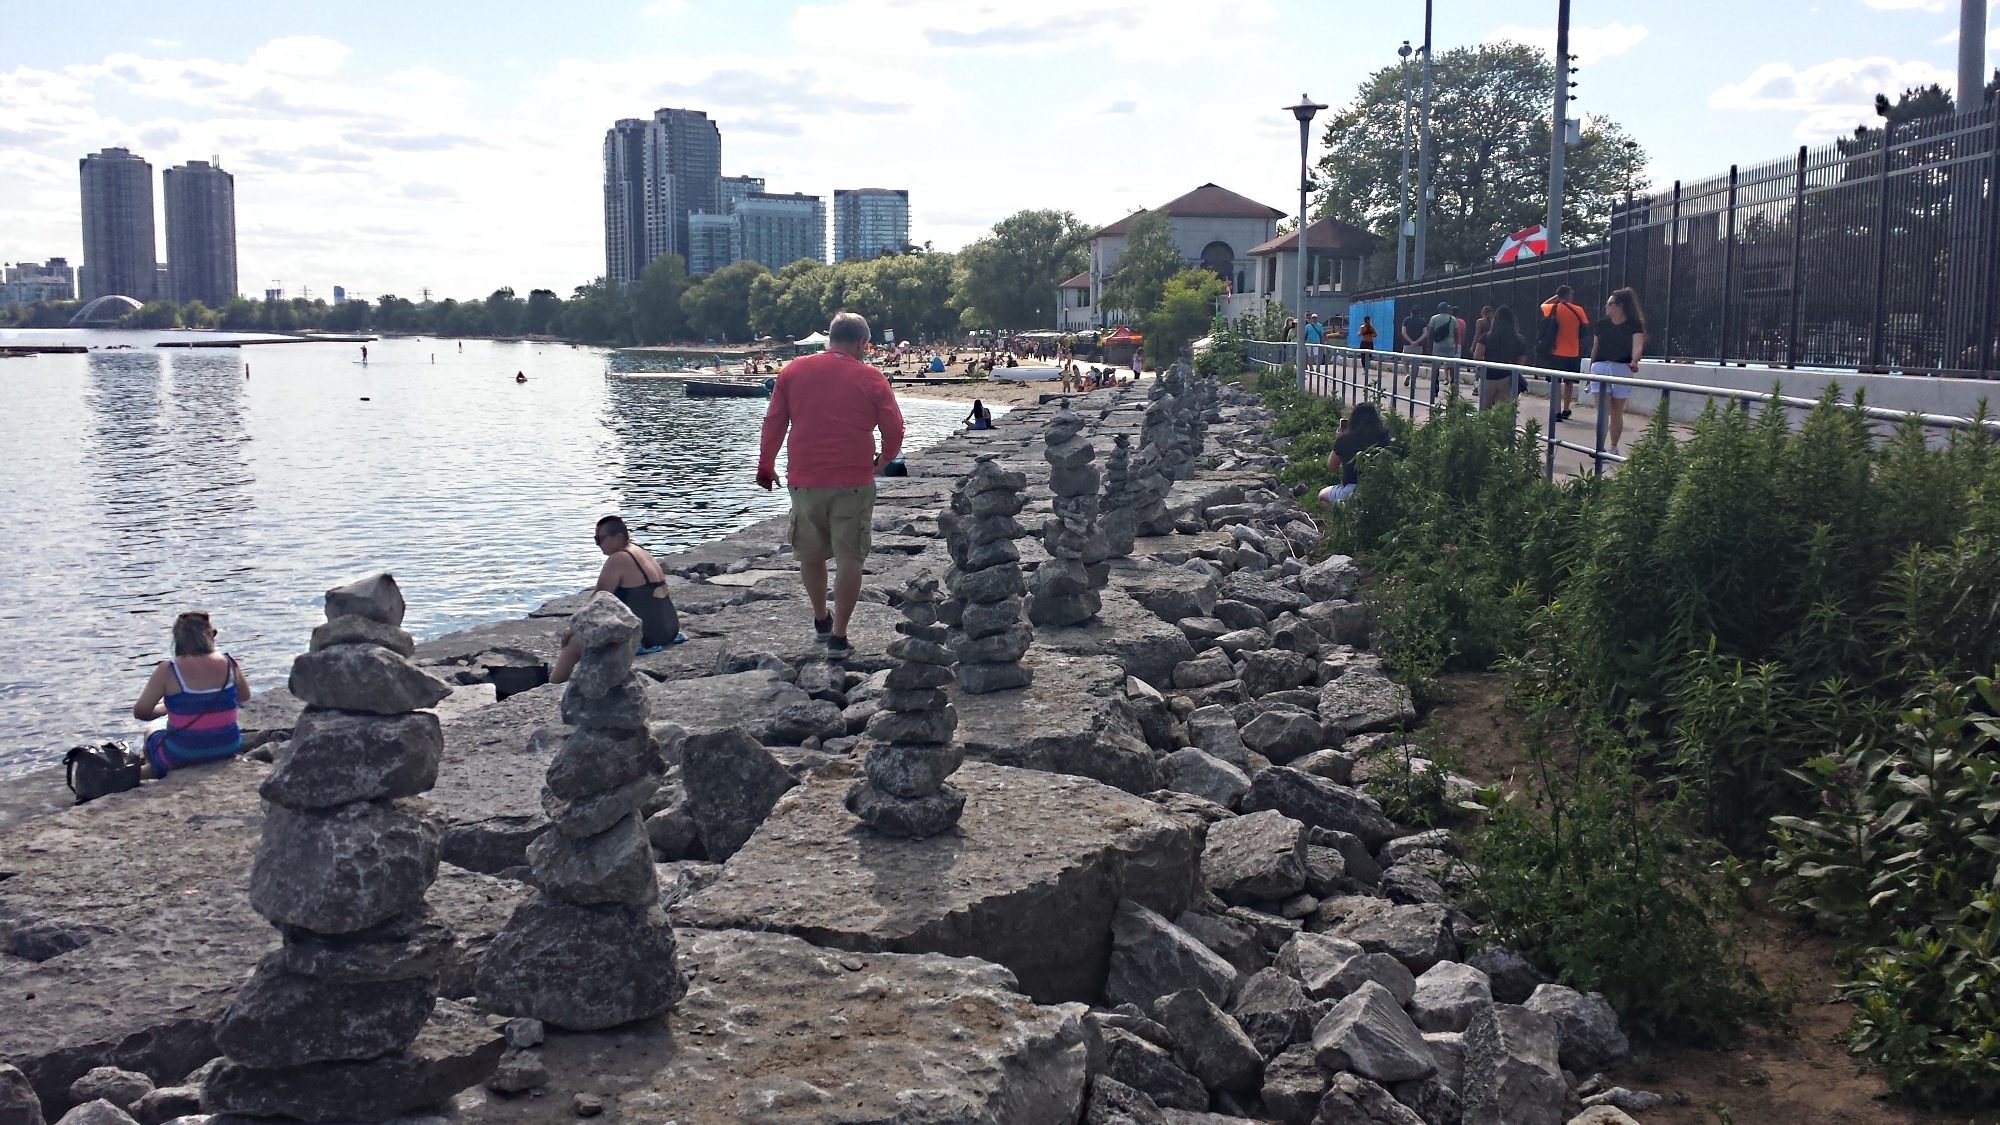 Row of rock sculptures behind Summyside pool in Toronto - evening view.